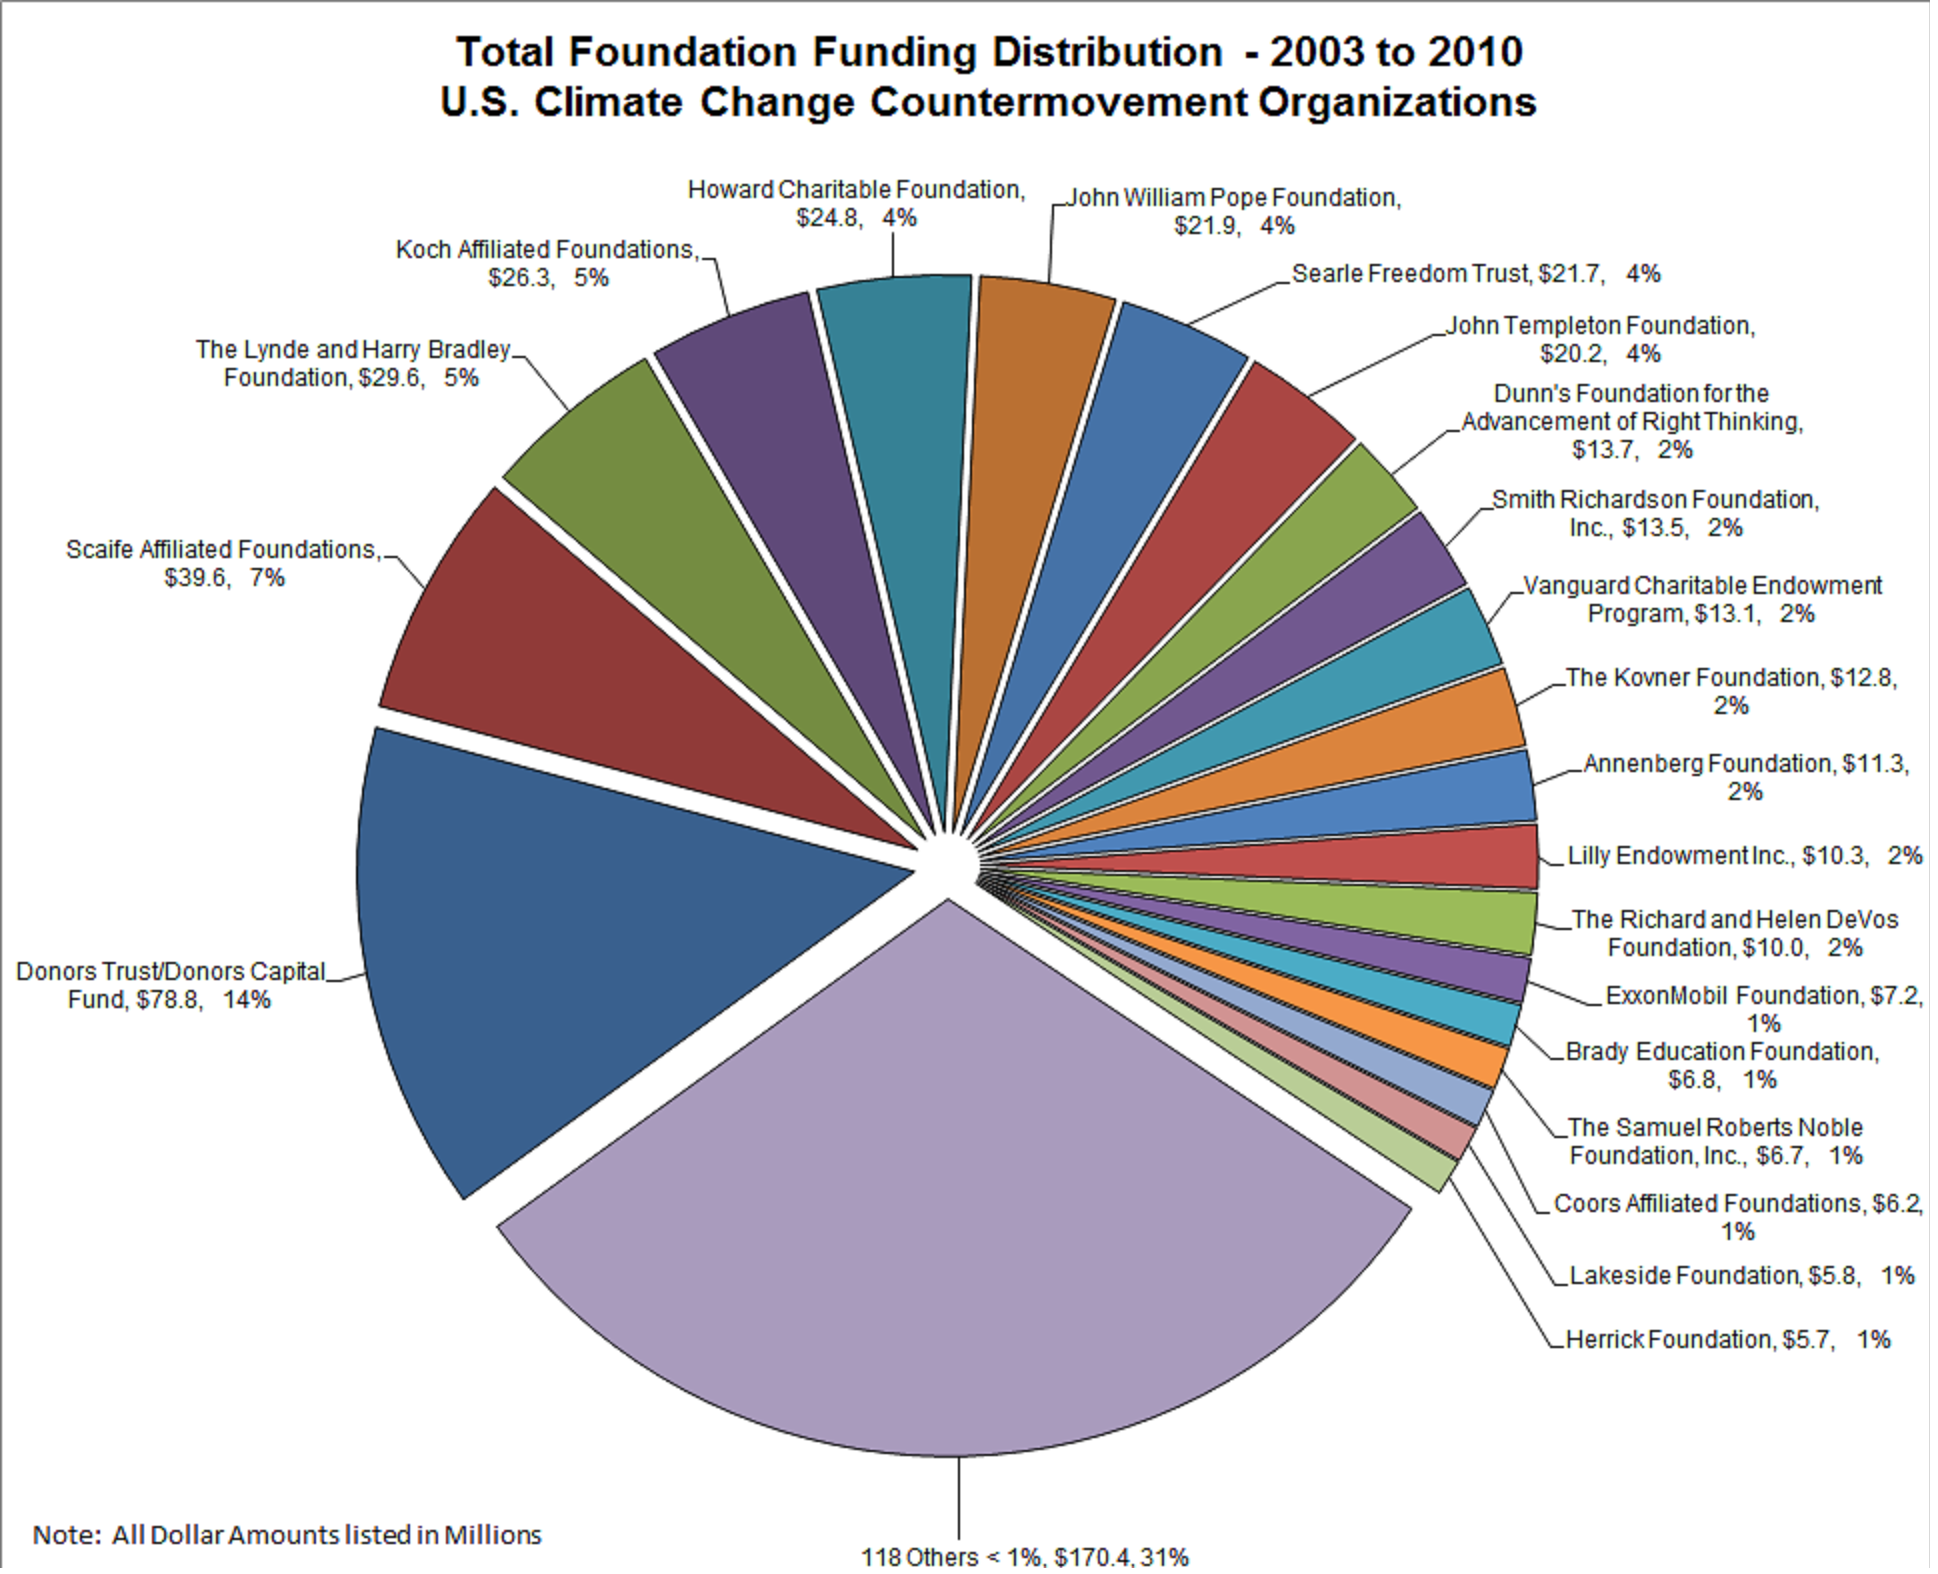 This chart shows the overall amount and percentage distribution of foundation funding of countermovement organizations